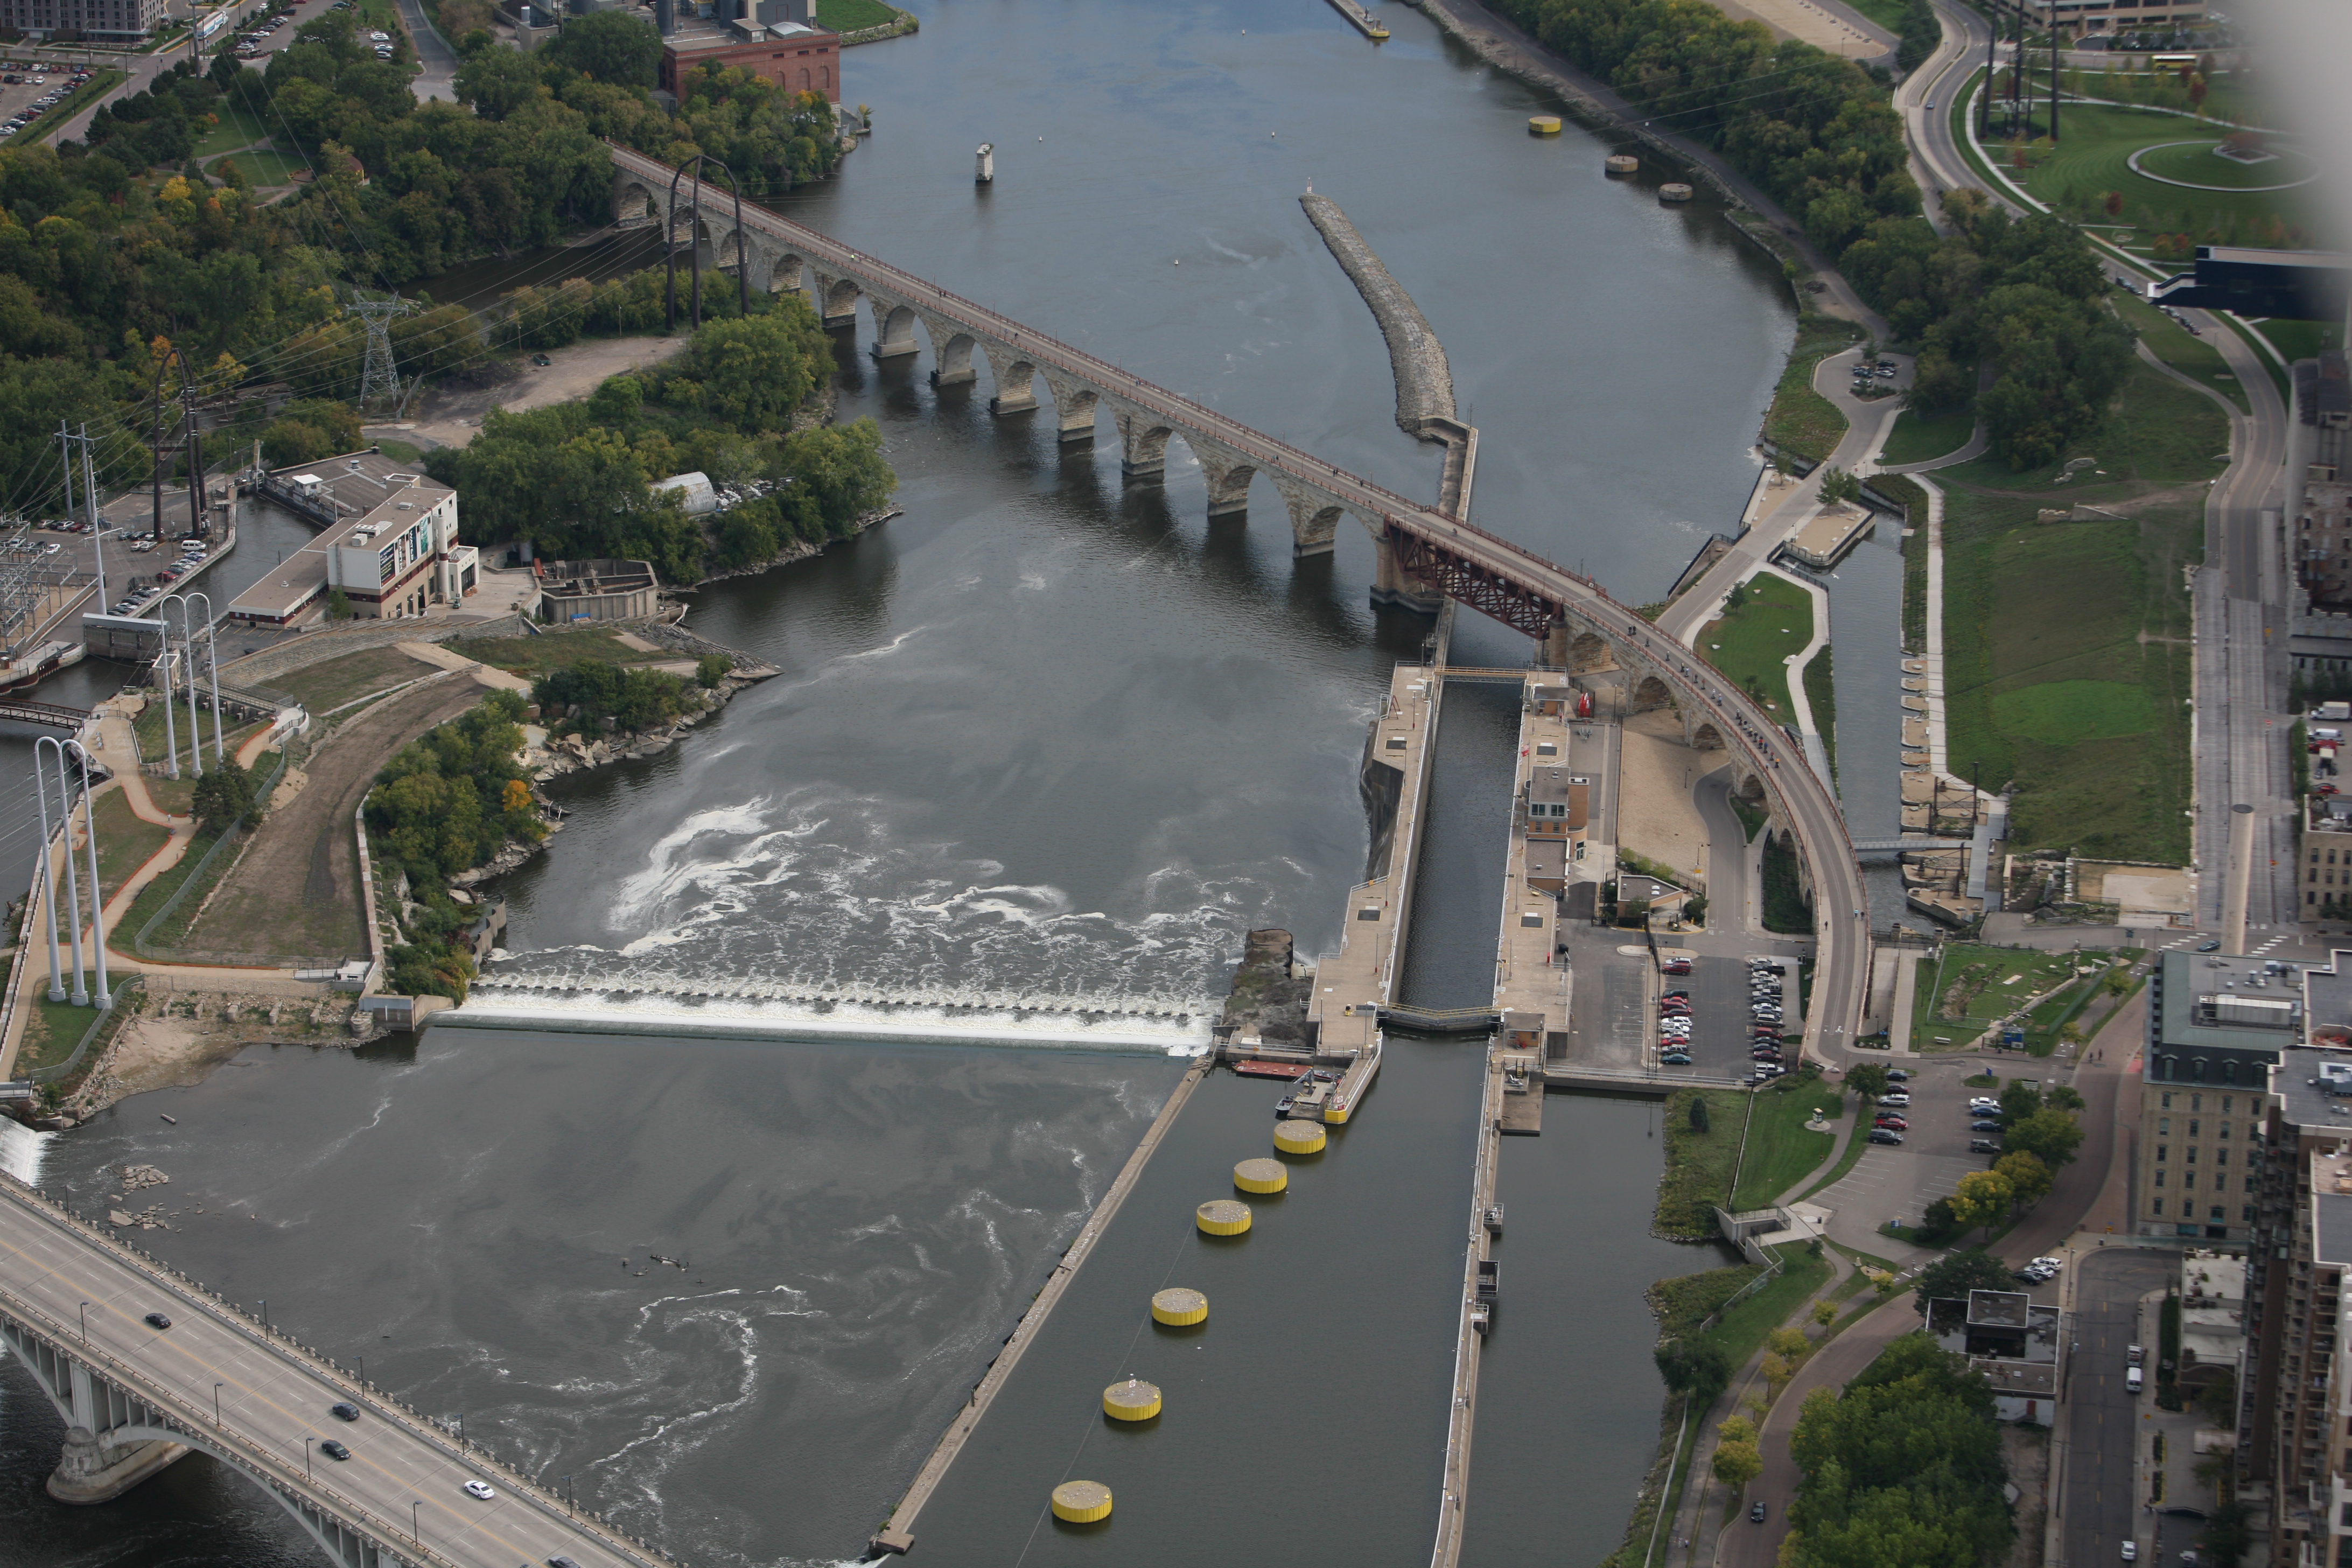 Aerial view of Upper St. Anthony Falls Lock and Dam looking downstream